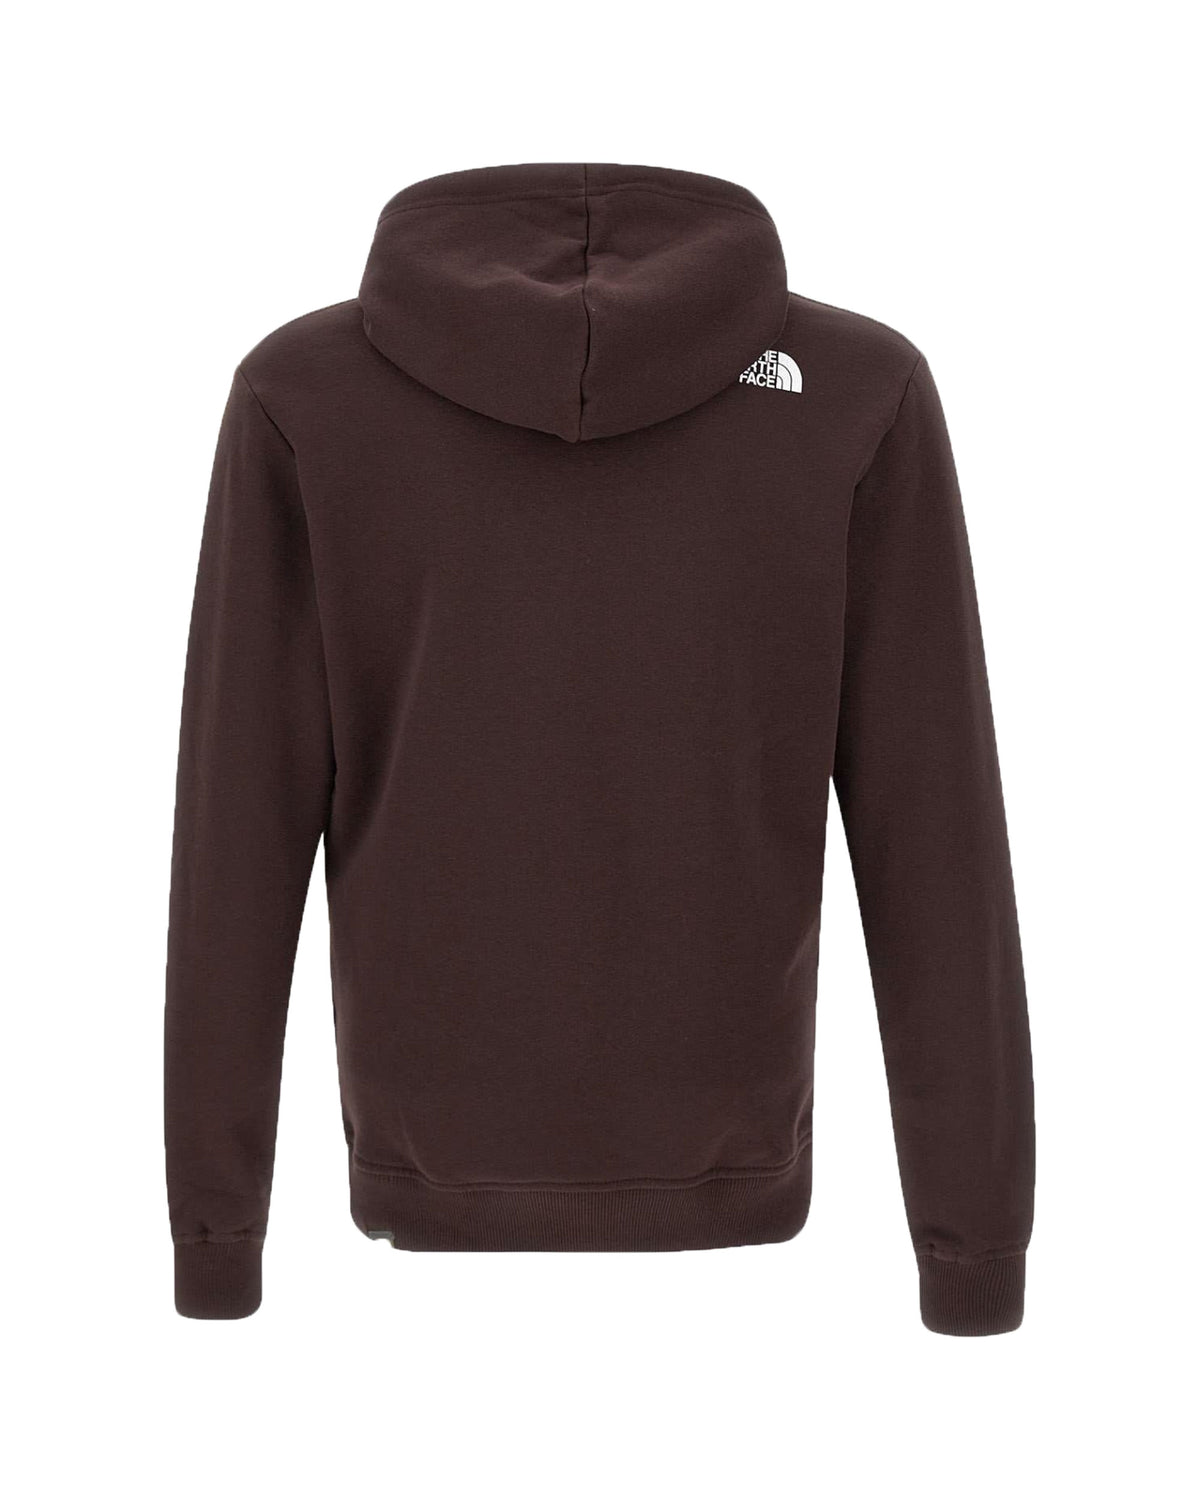 Man Hoodie The North Face Fine Coal Brown